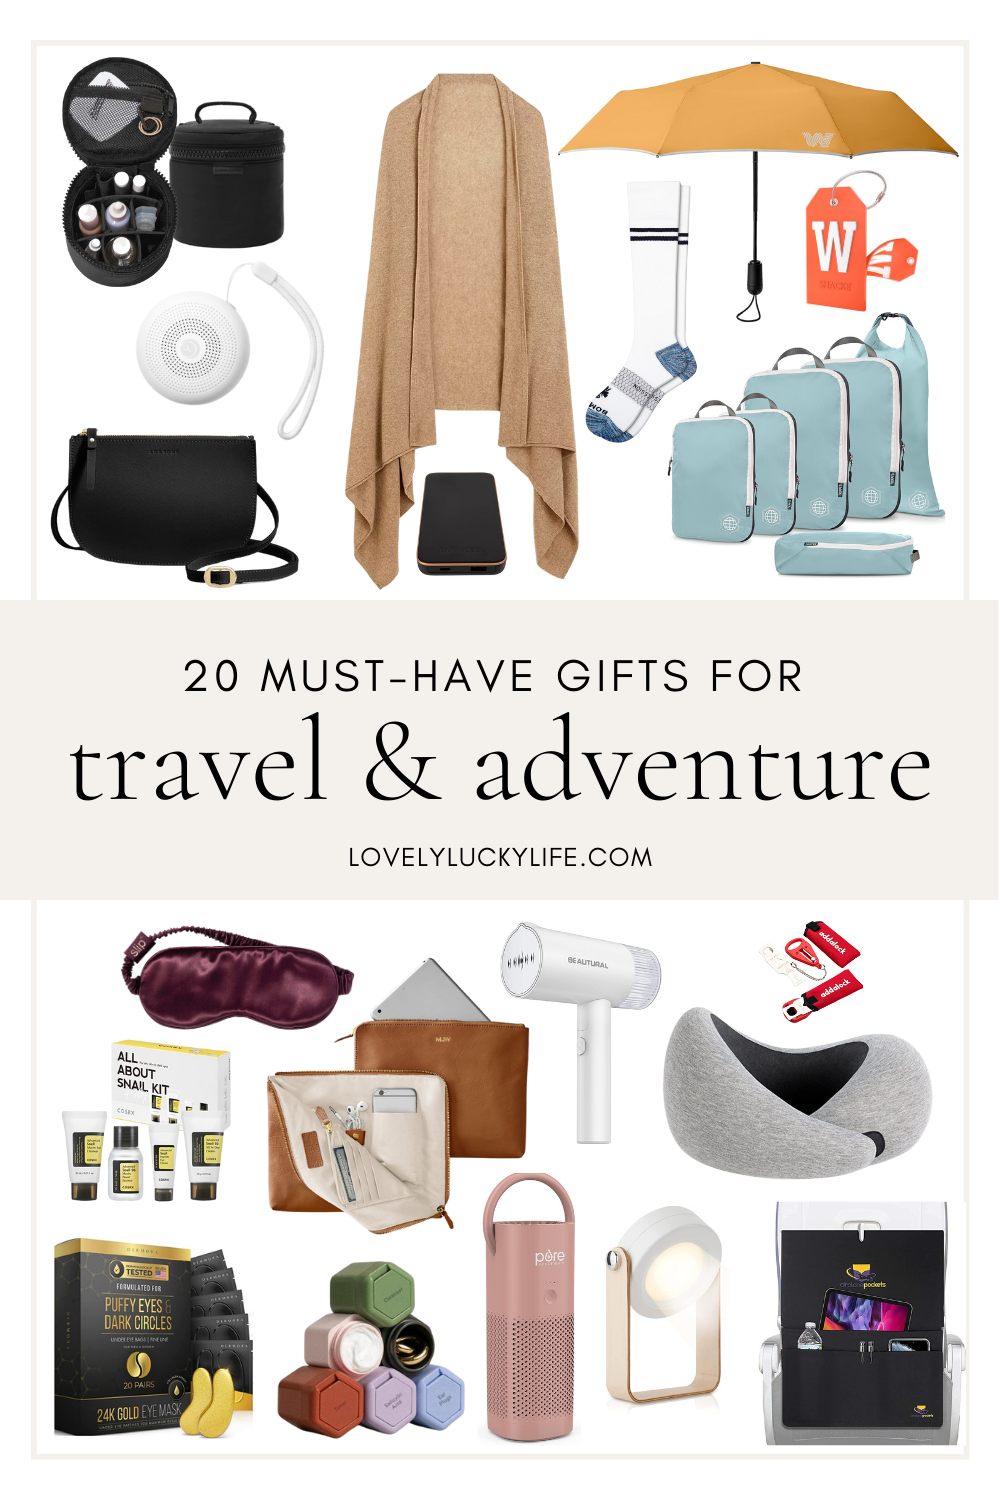 https://www.lovelyluckylife.com/wp-content/uploads/2023/04/Must-Have-Gifts-for-Travel-Adventure-1.png